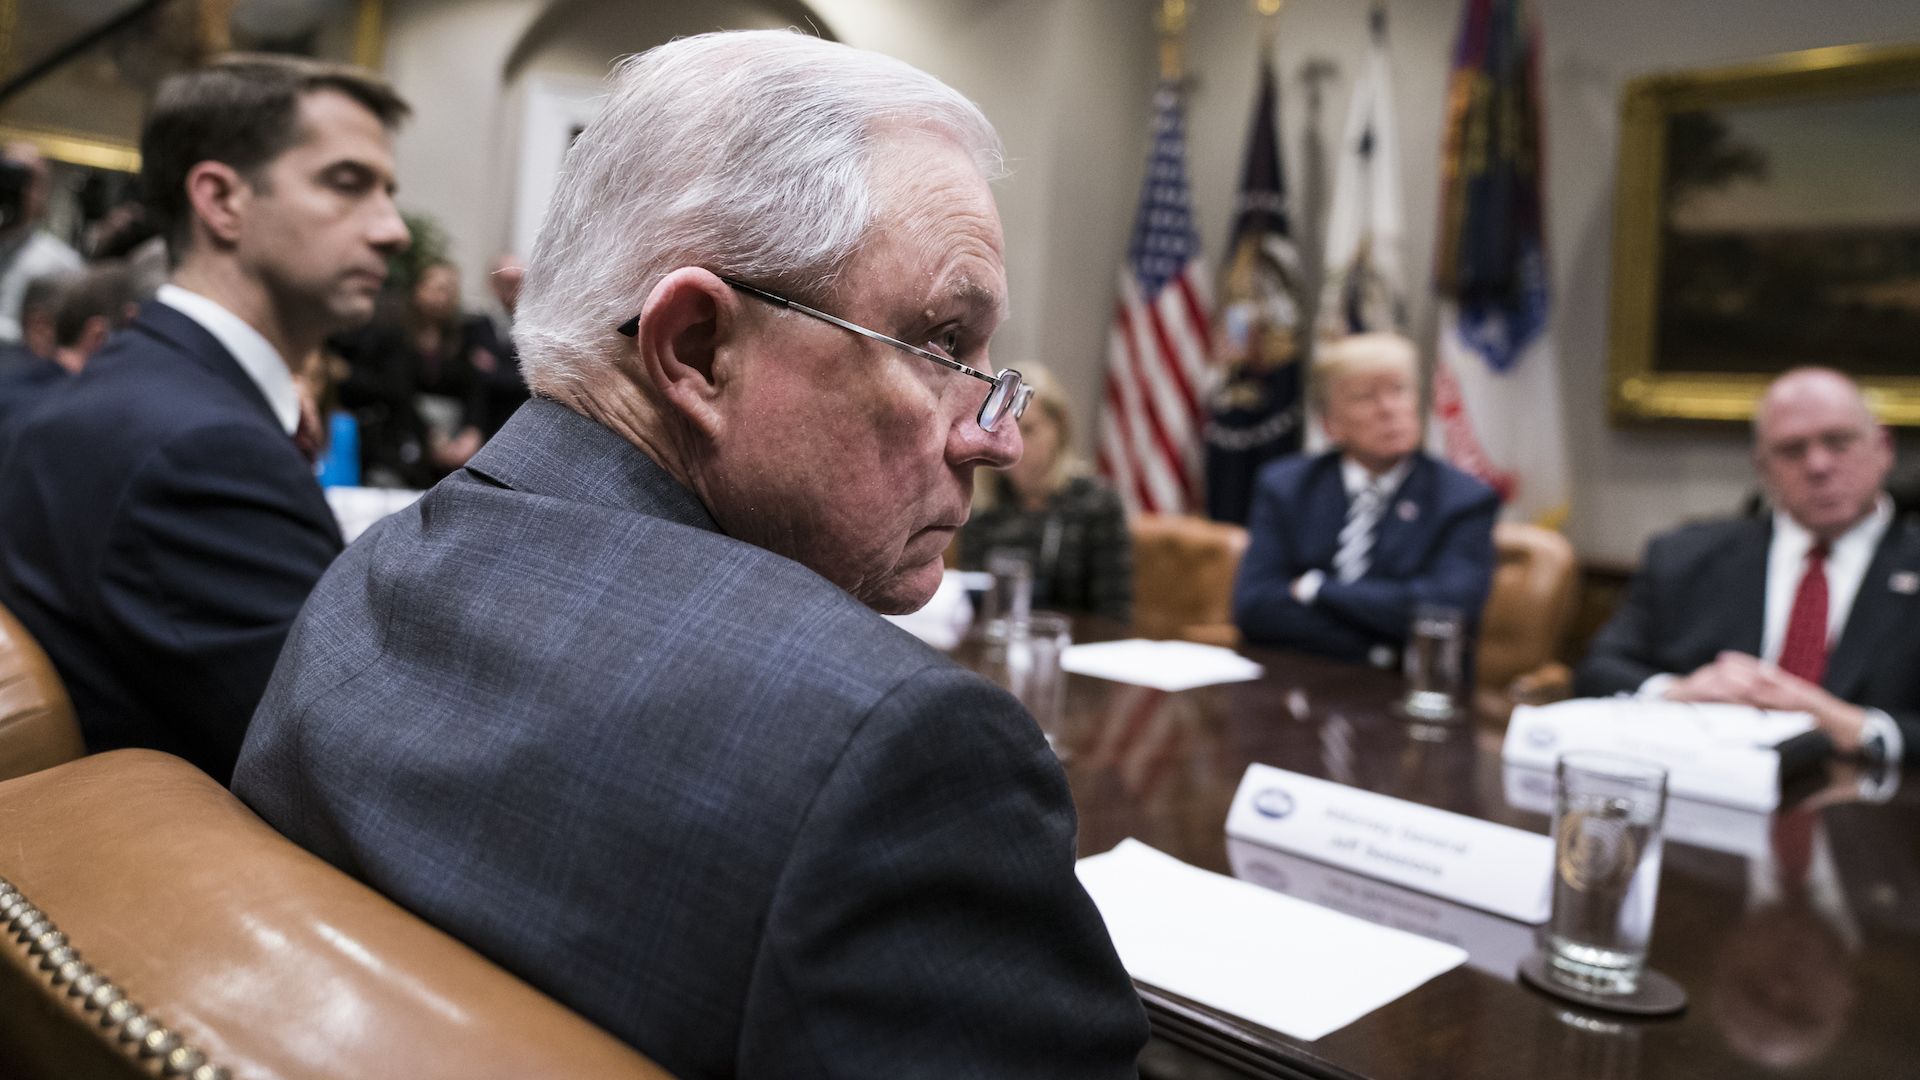 Jeff Sessions sitting at a desk and his glasses down on his nose